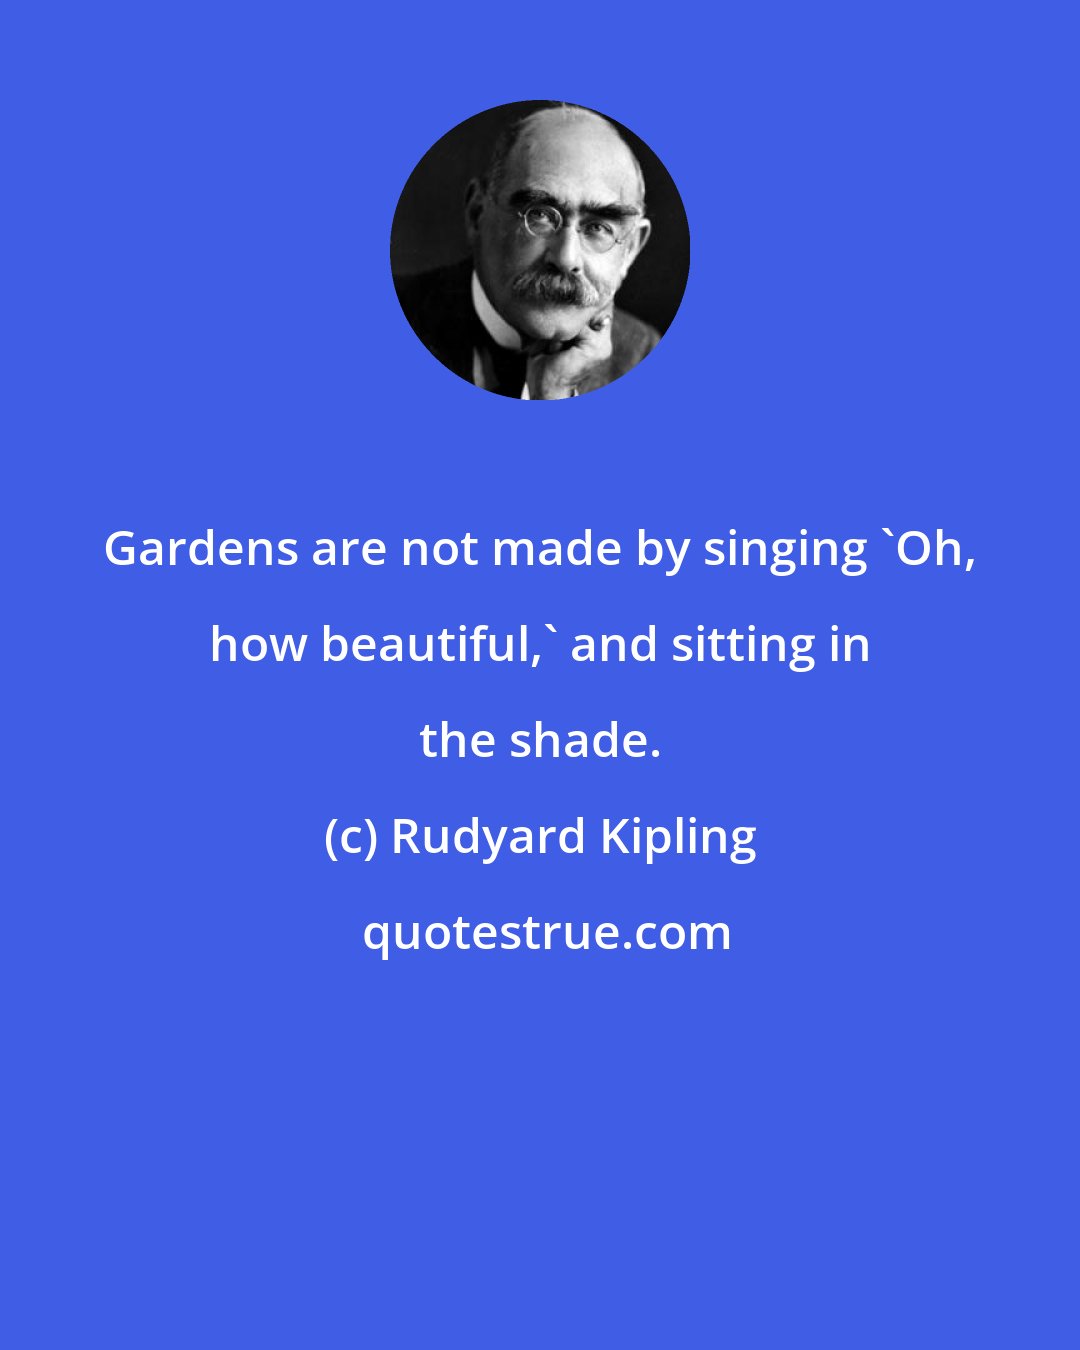 Rudyard Kipling: Gardens are not made by singing 'Oh, how beautiful,' and sitting in the shade.